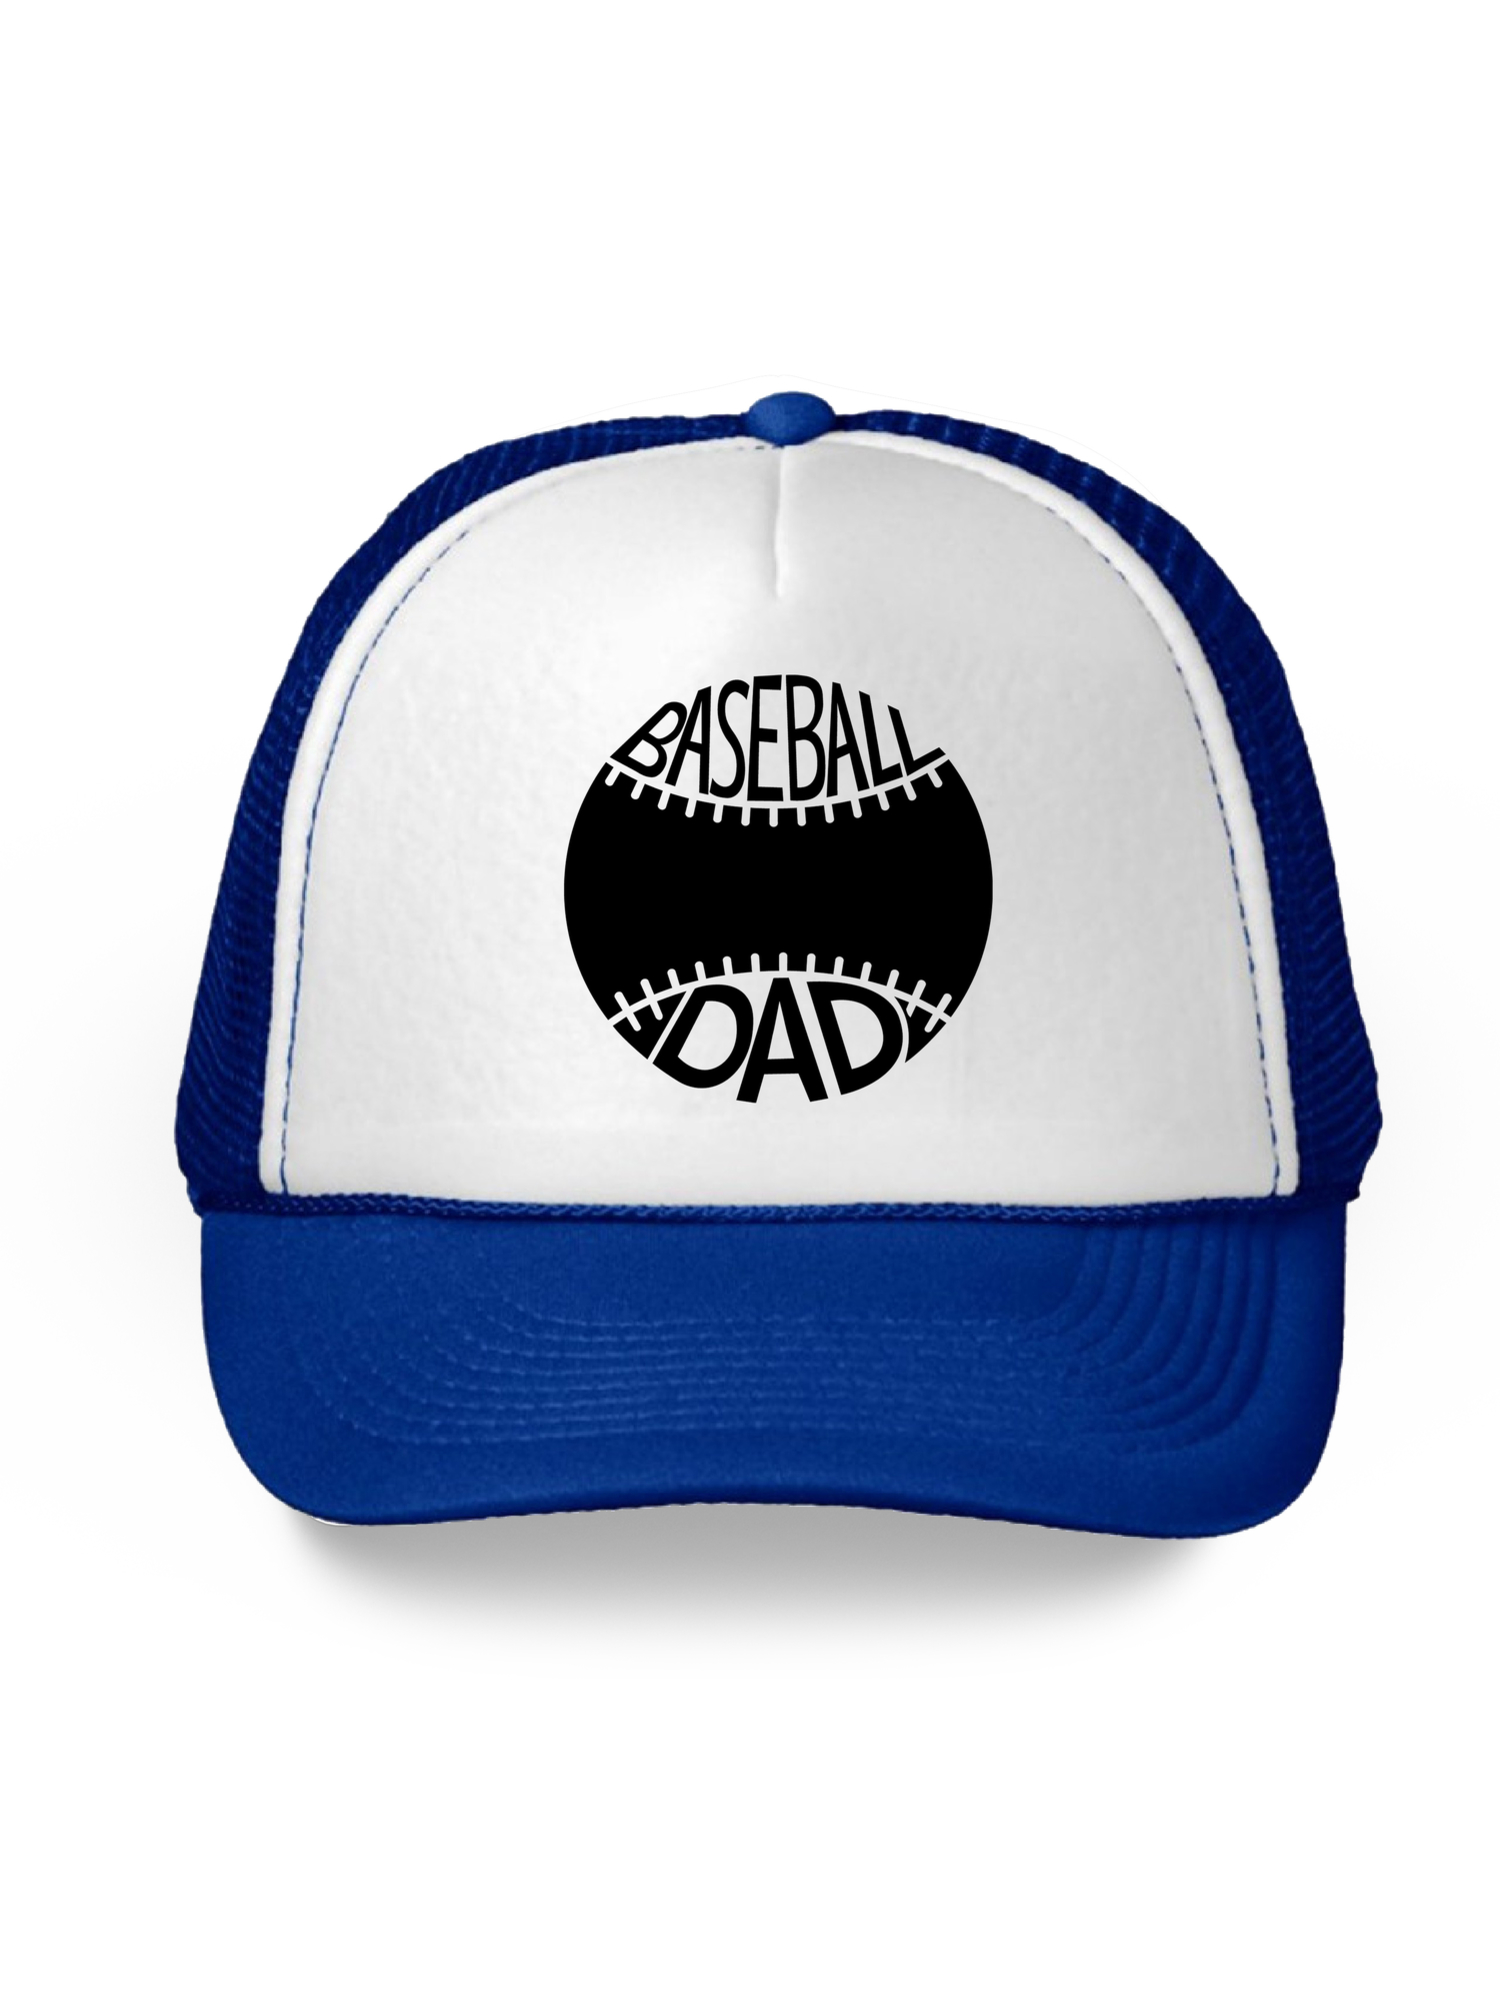 Awkward Styles Baseball Dad Trucker Hat Baseball Hat for Dad Baseball Gifts Father's Day Trucker Hats Sports Dad Snapback Hat Baseball Fans Cheer Dad Trucker Hat Cool Sports Gifts for Dad Father Hat - image 1 of 6